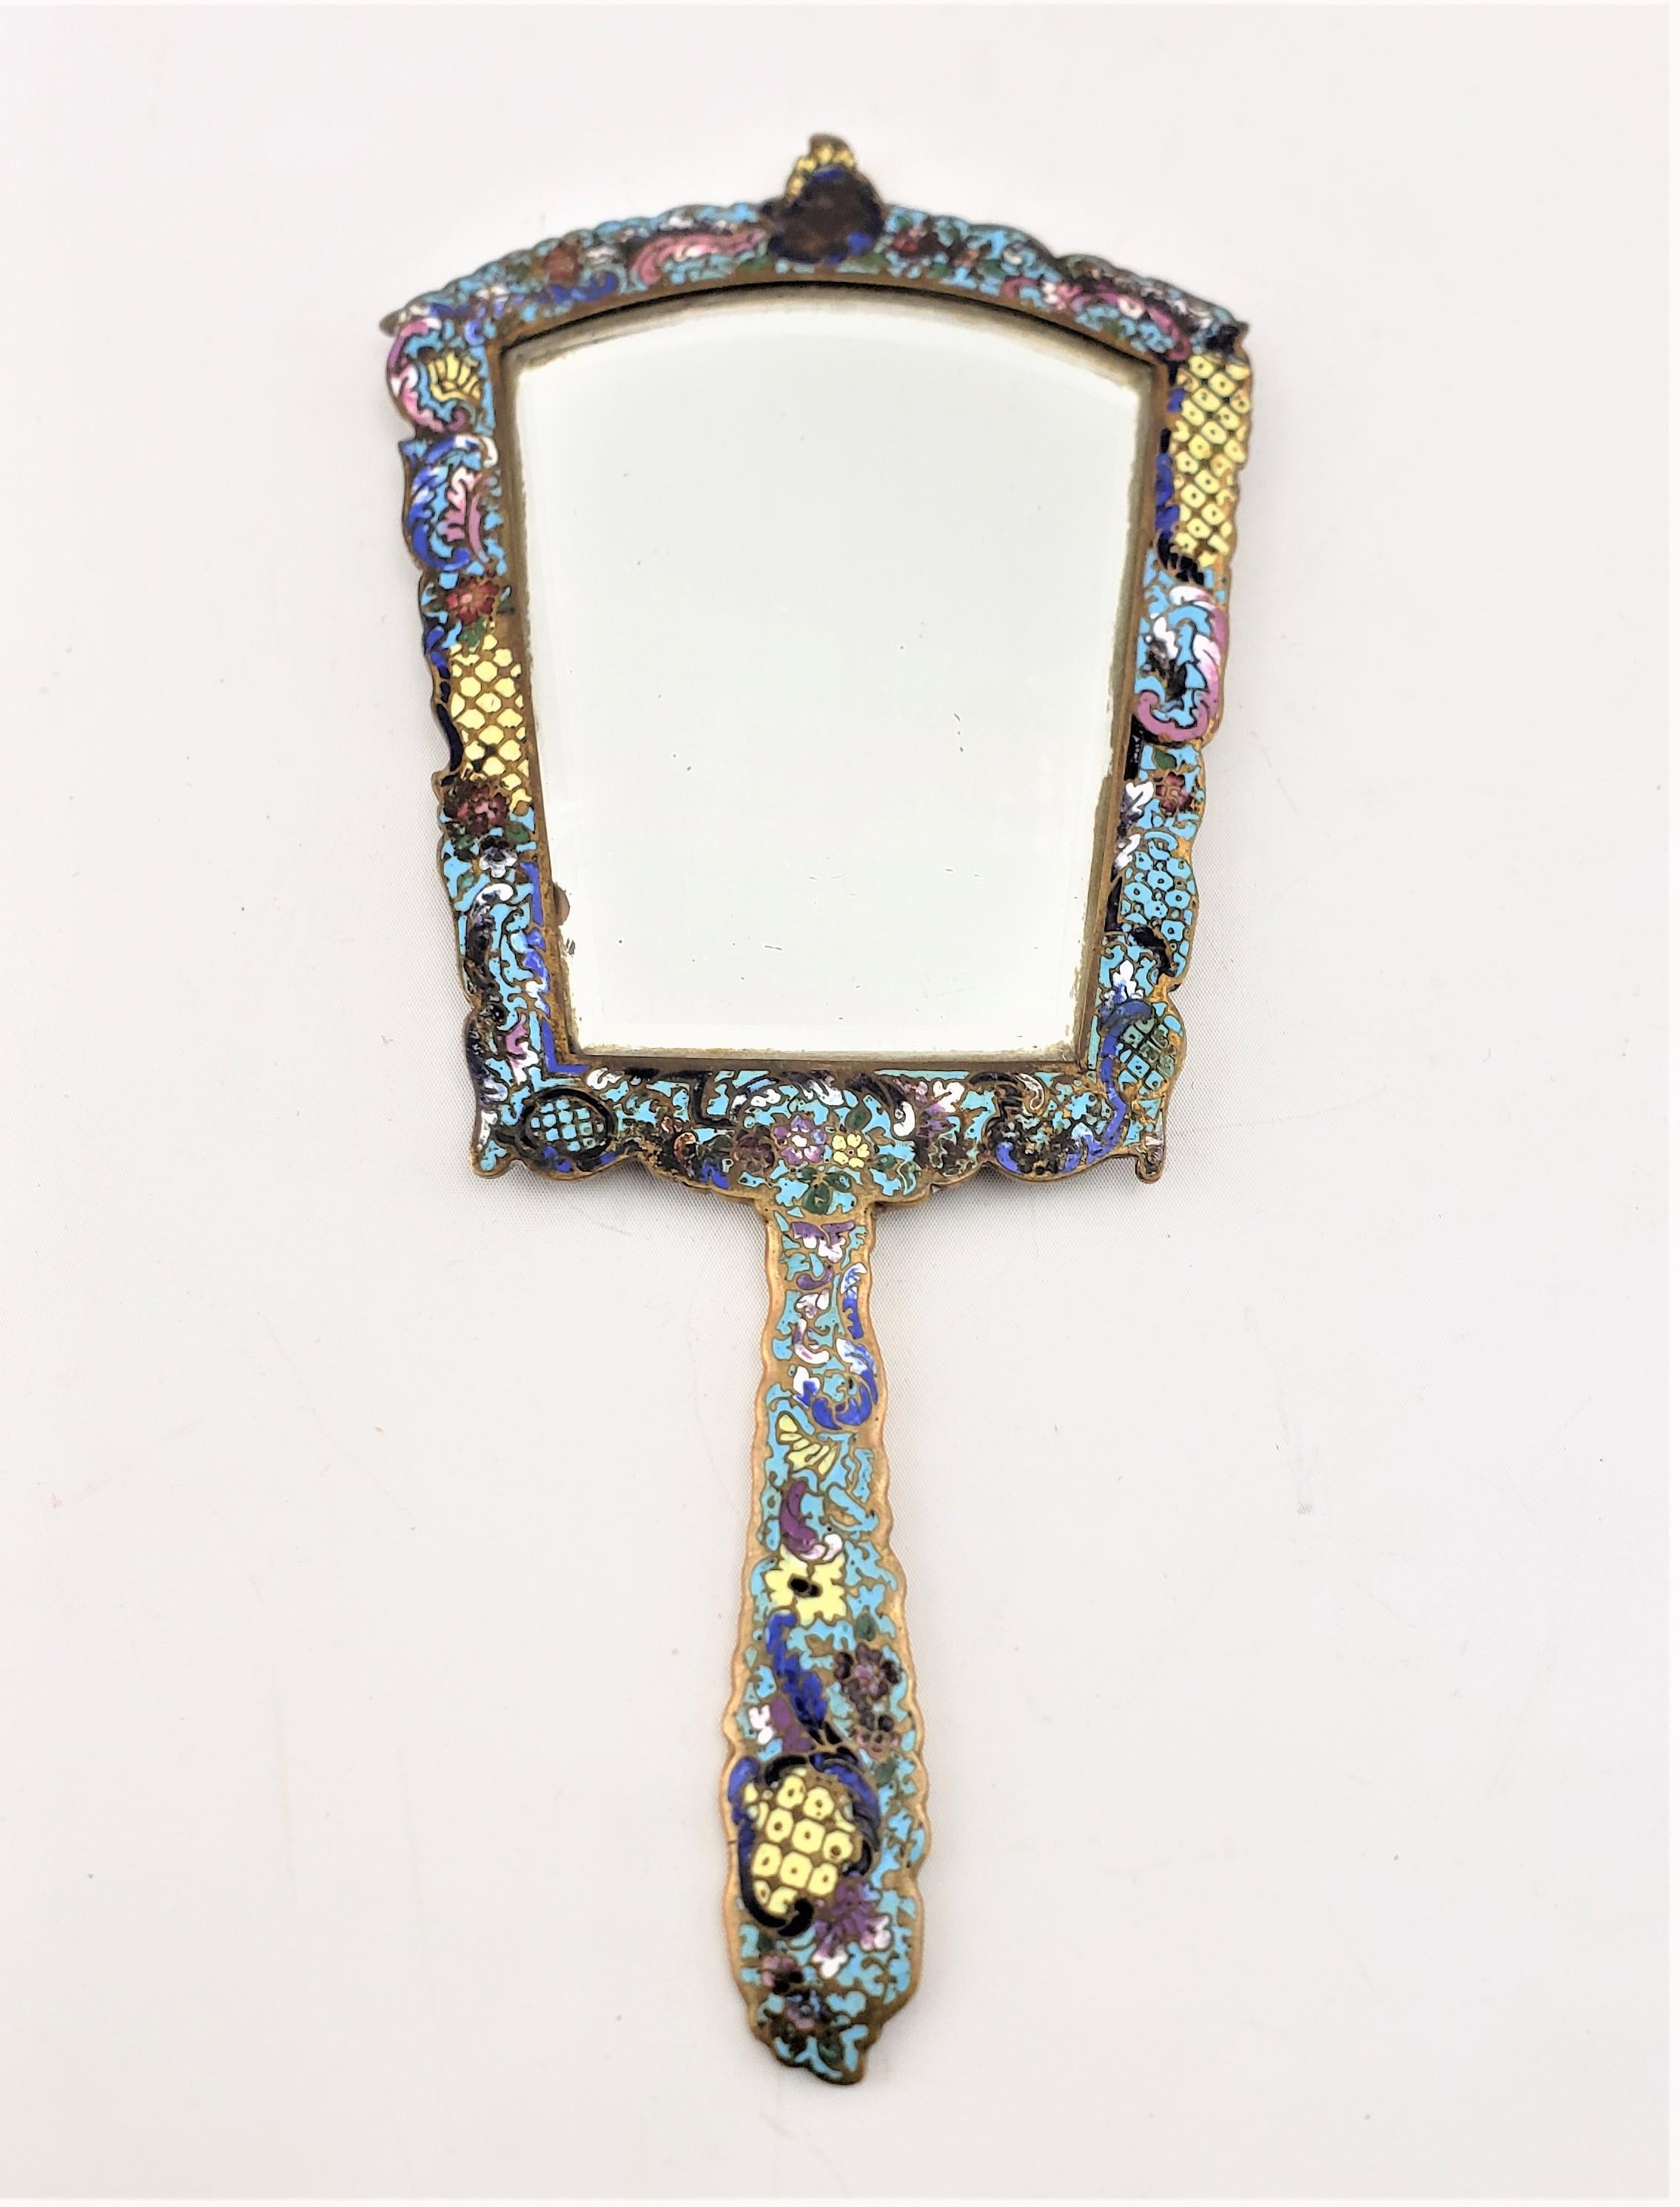 This antique dresser mirror is signed with initials by an unidentified maker, but presumed to originate from France and dating to approximately 1900 and done in the period Art Nouveau style. The shield shaped hand mirror is done in brass with nicely